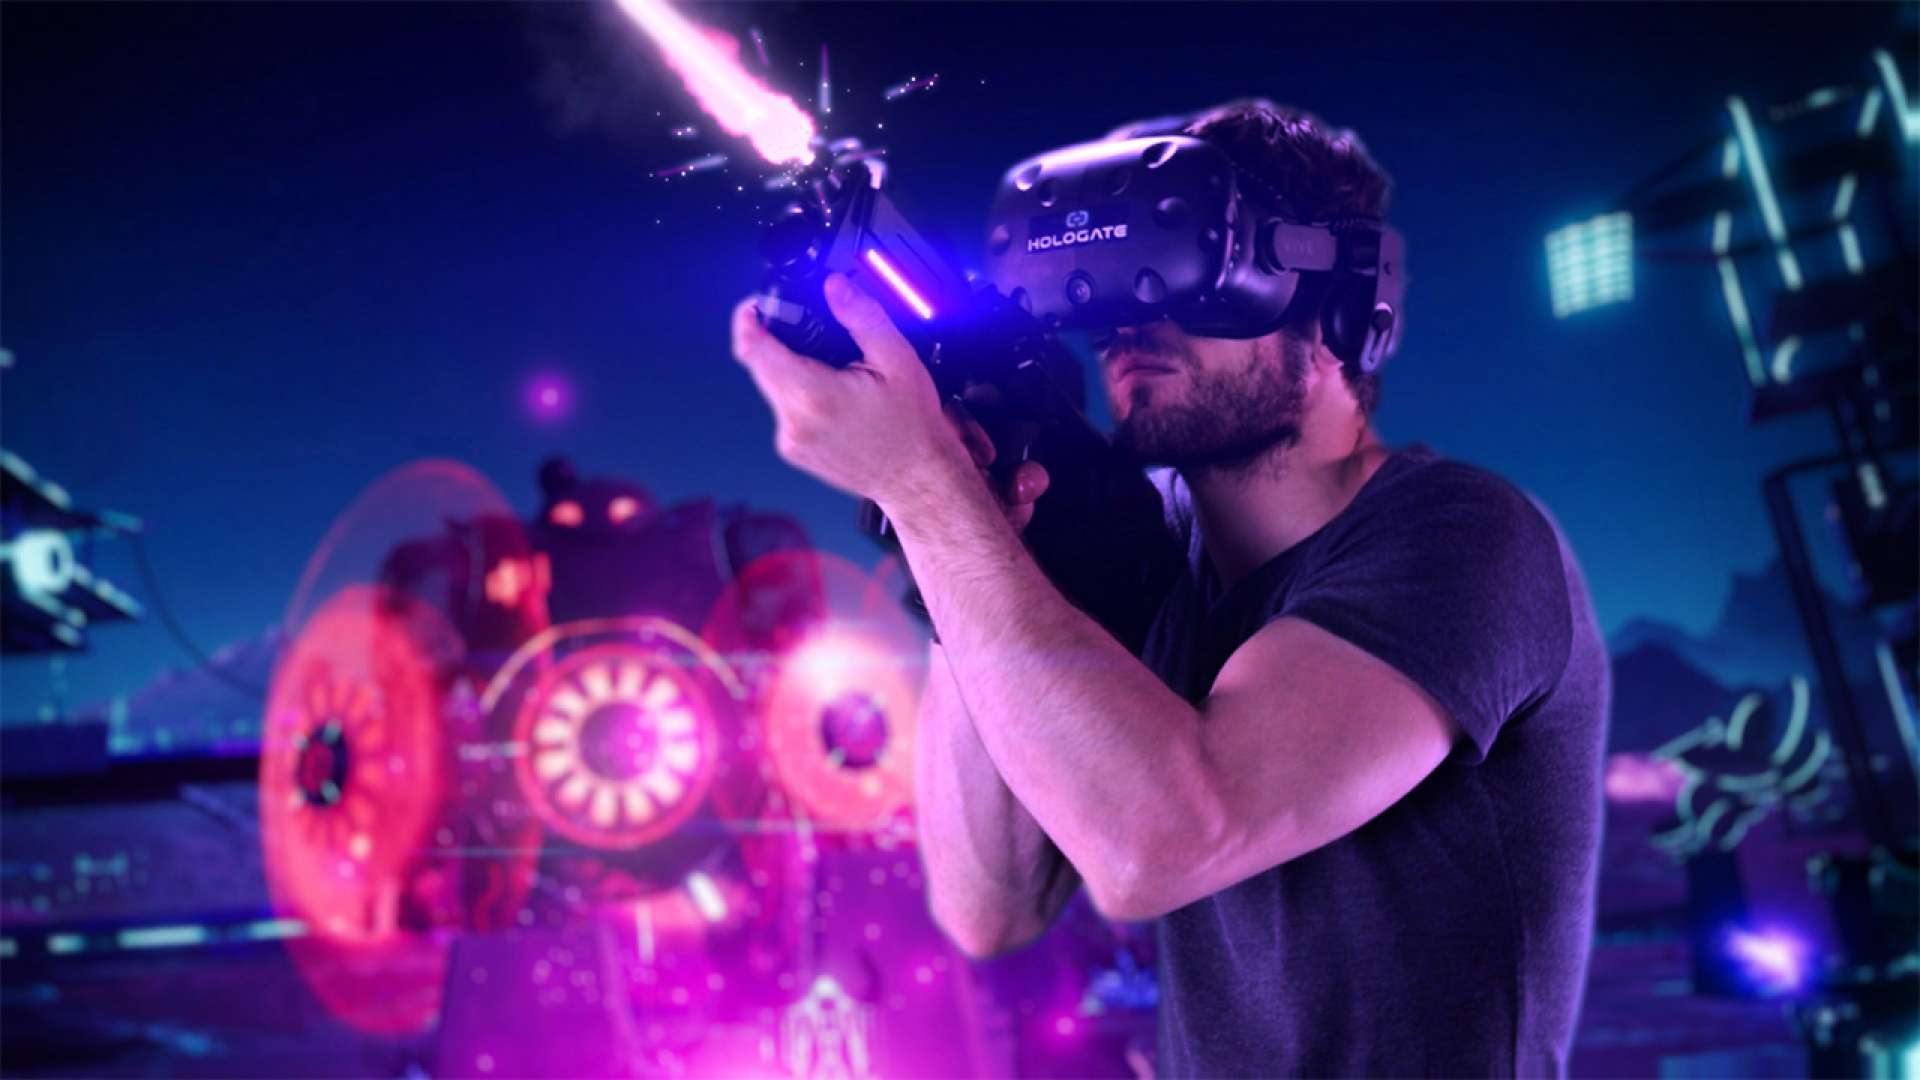 Auckland Entertainment Centre with Hologate VR